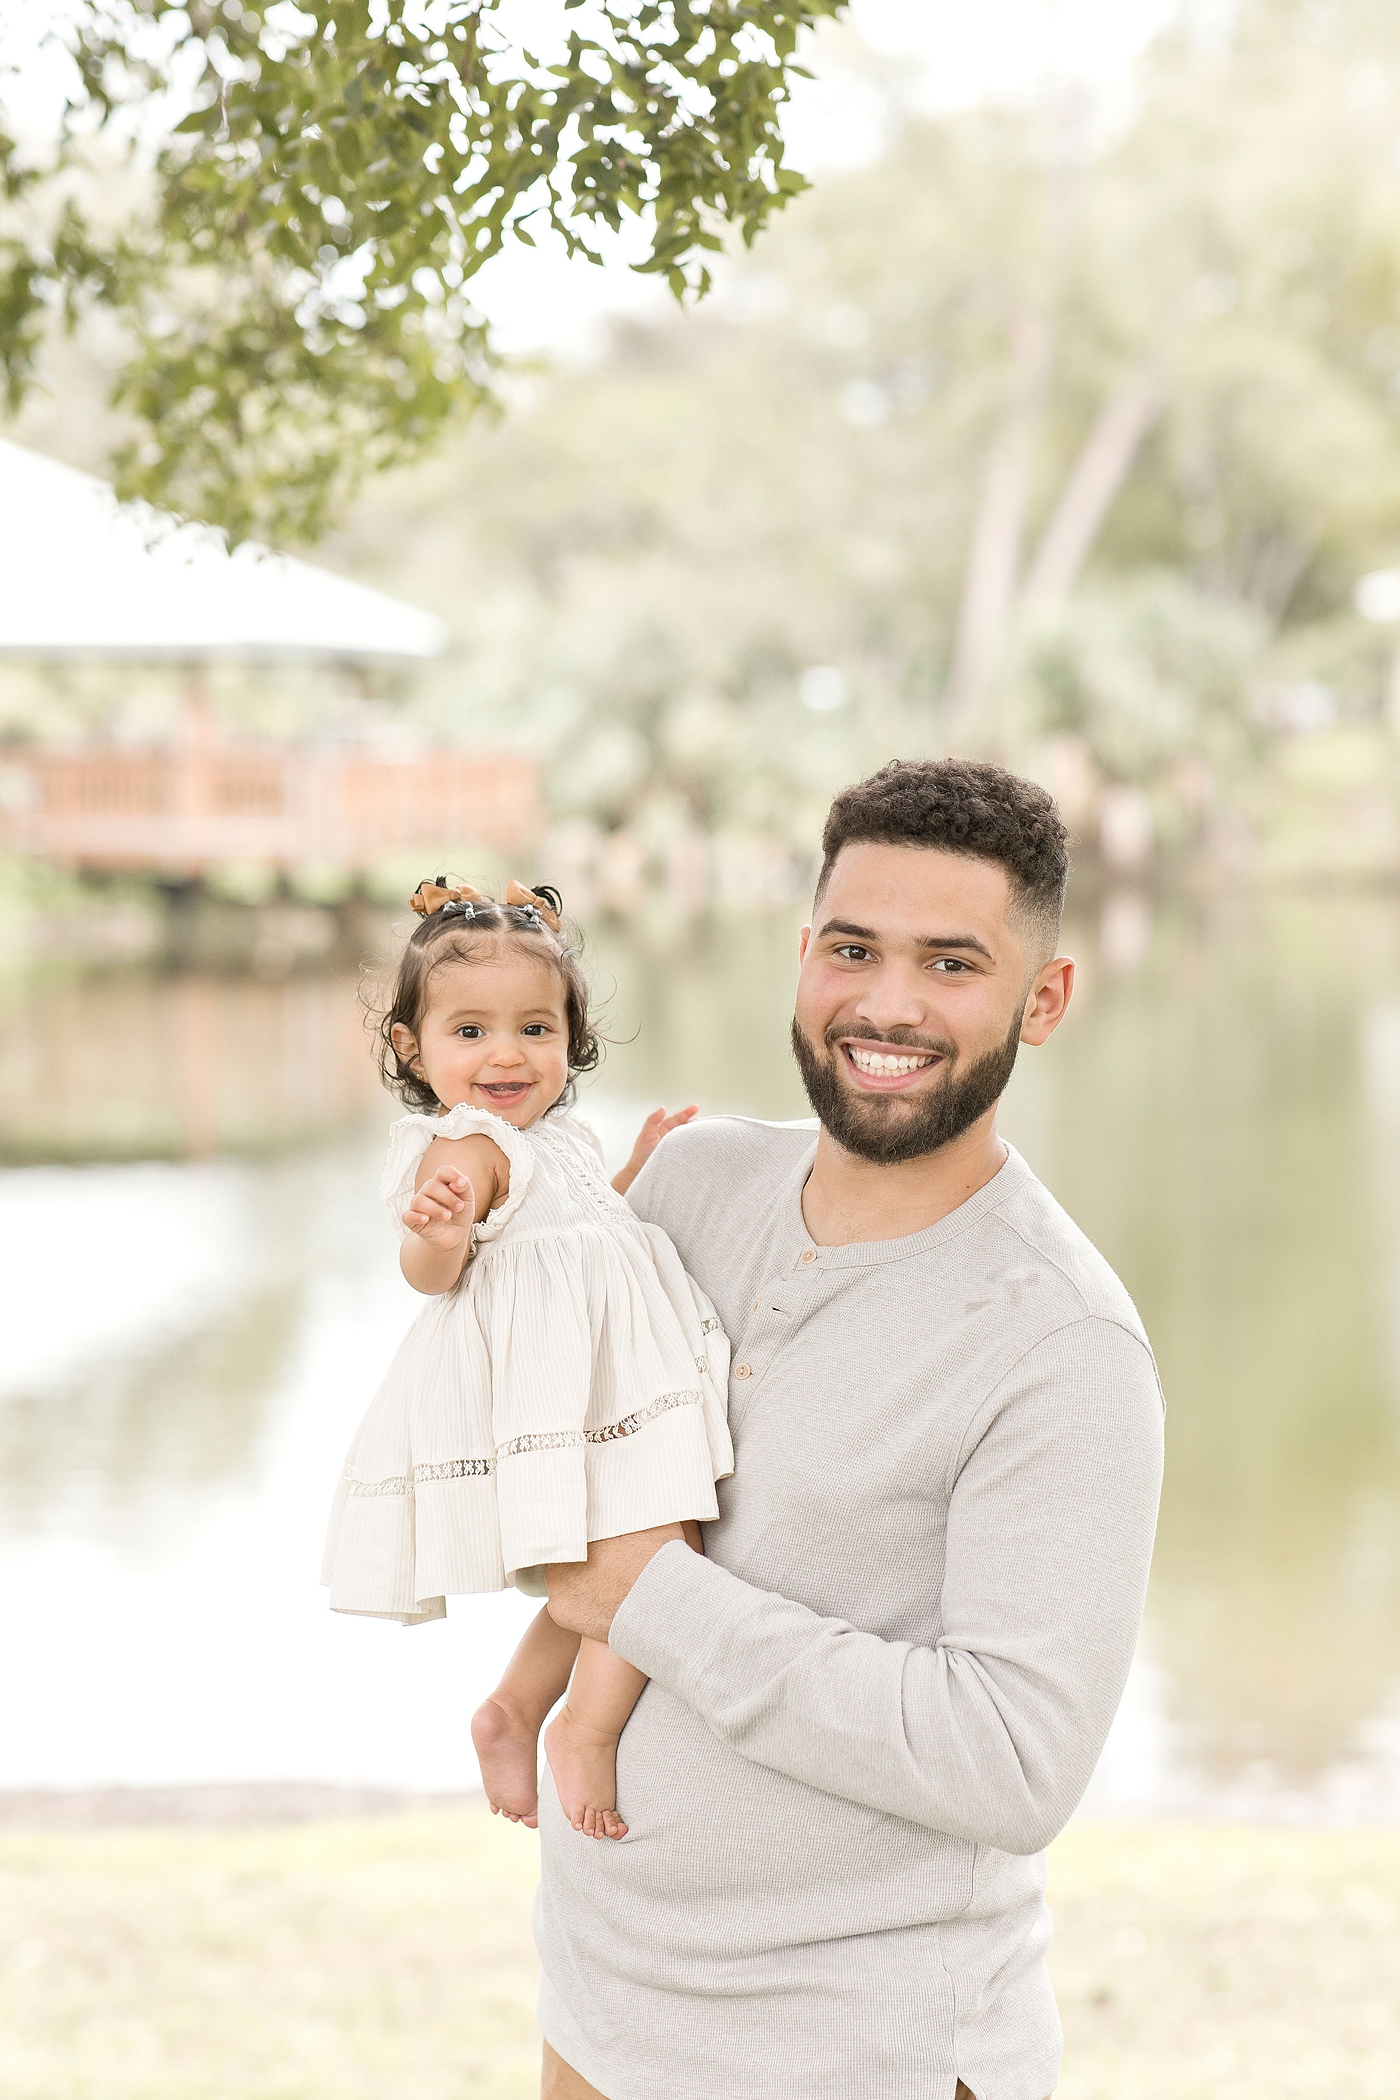 Dad holds his daughter smiling during baby photography miami session. Photo by Ivanna Vidal Photography.